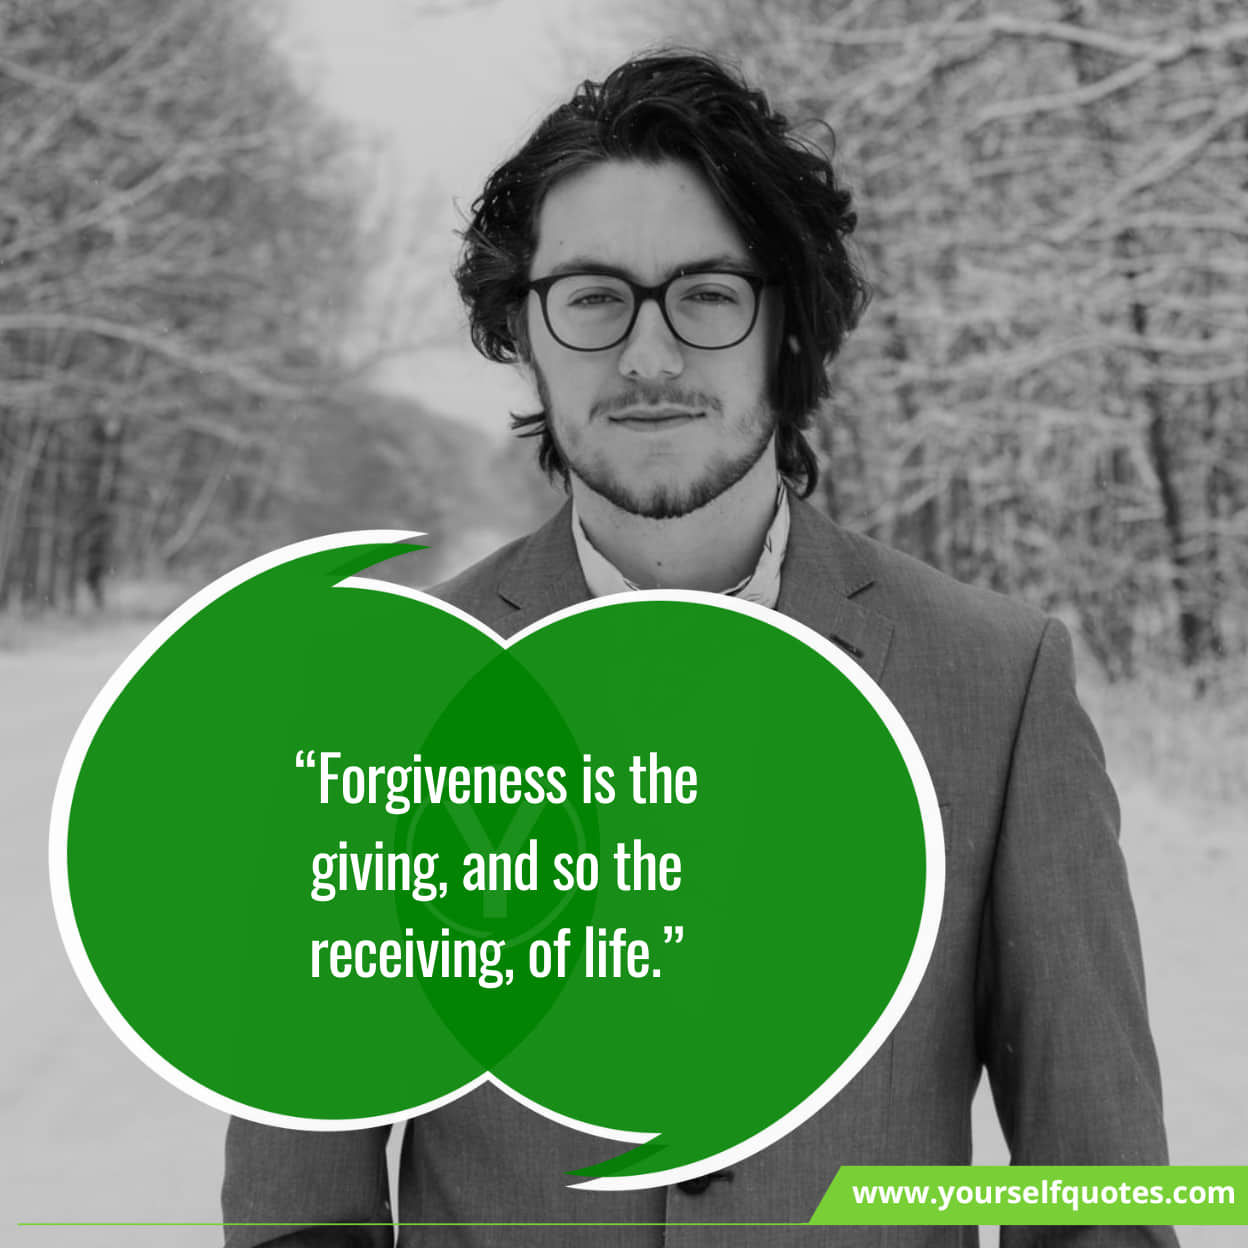 Best Inspiring Quotes On Forgiveness